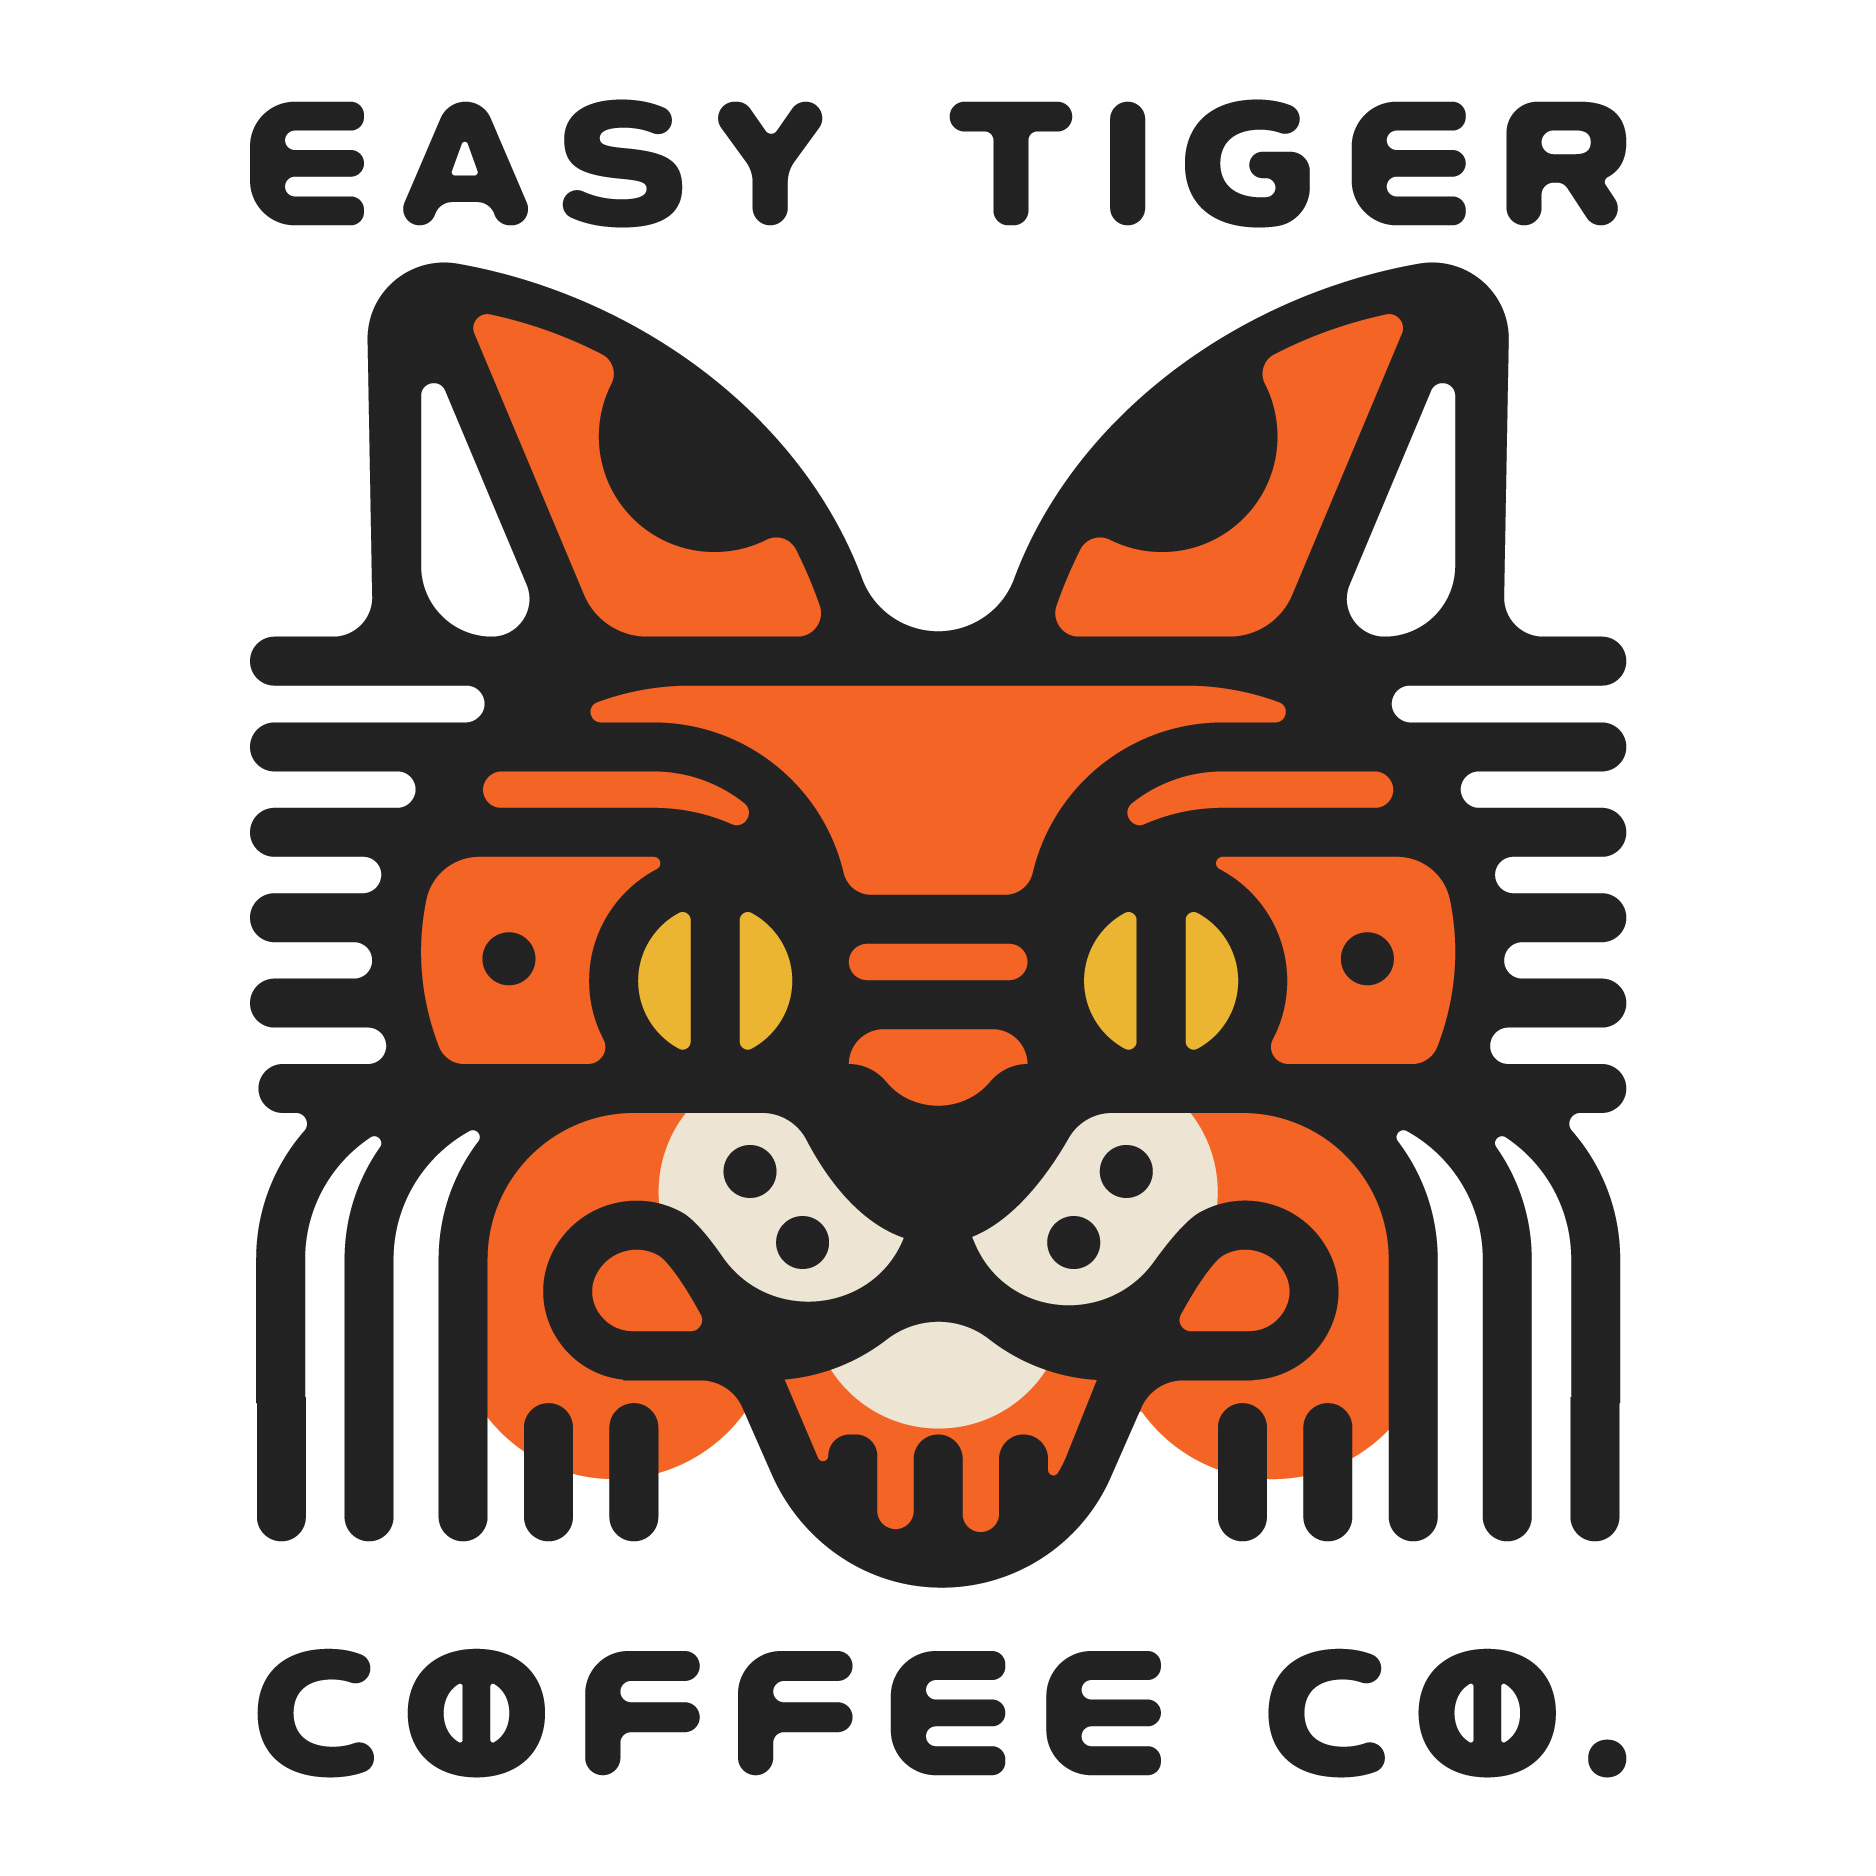 Easy Tiger Coffee Co. logo design by logo designer Ellen Mosiman for your inspiration and for the worlds largest logo competition